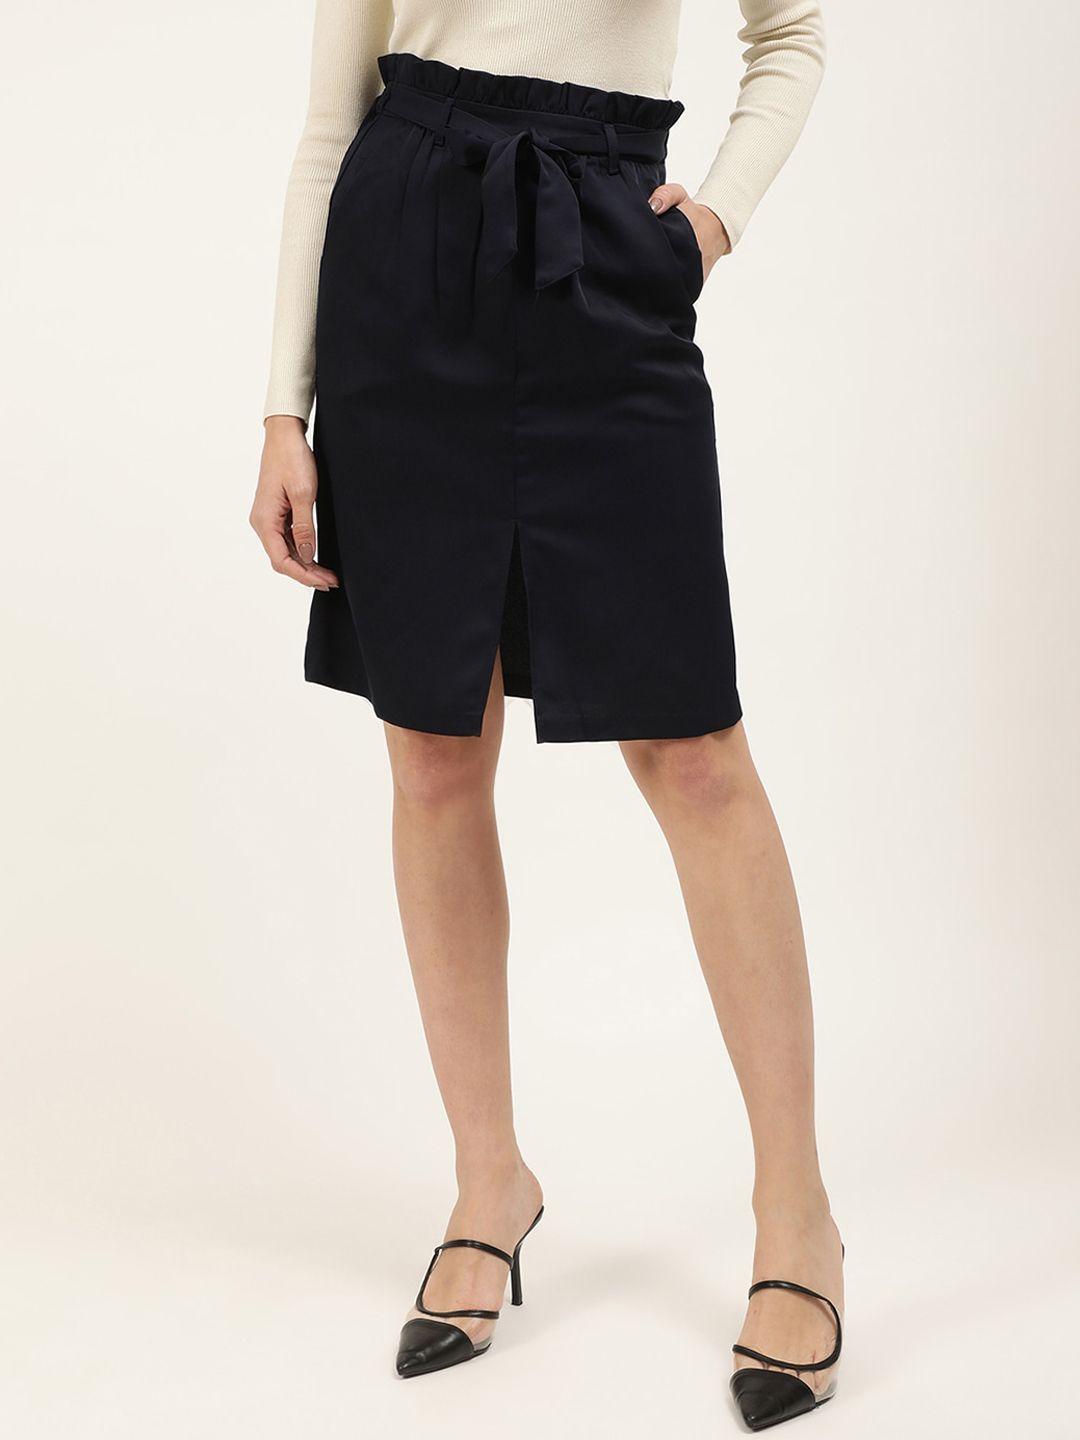 centrestage-women-navy-blue-solid-knee-length-a-line-skirt